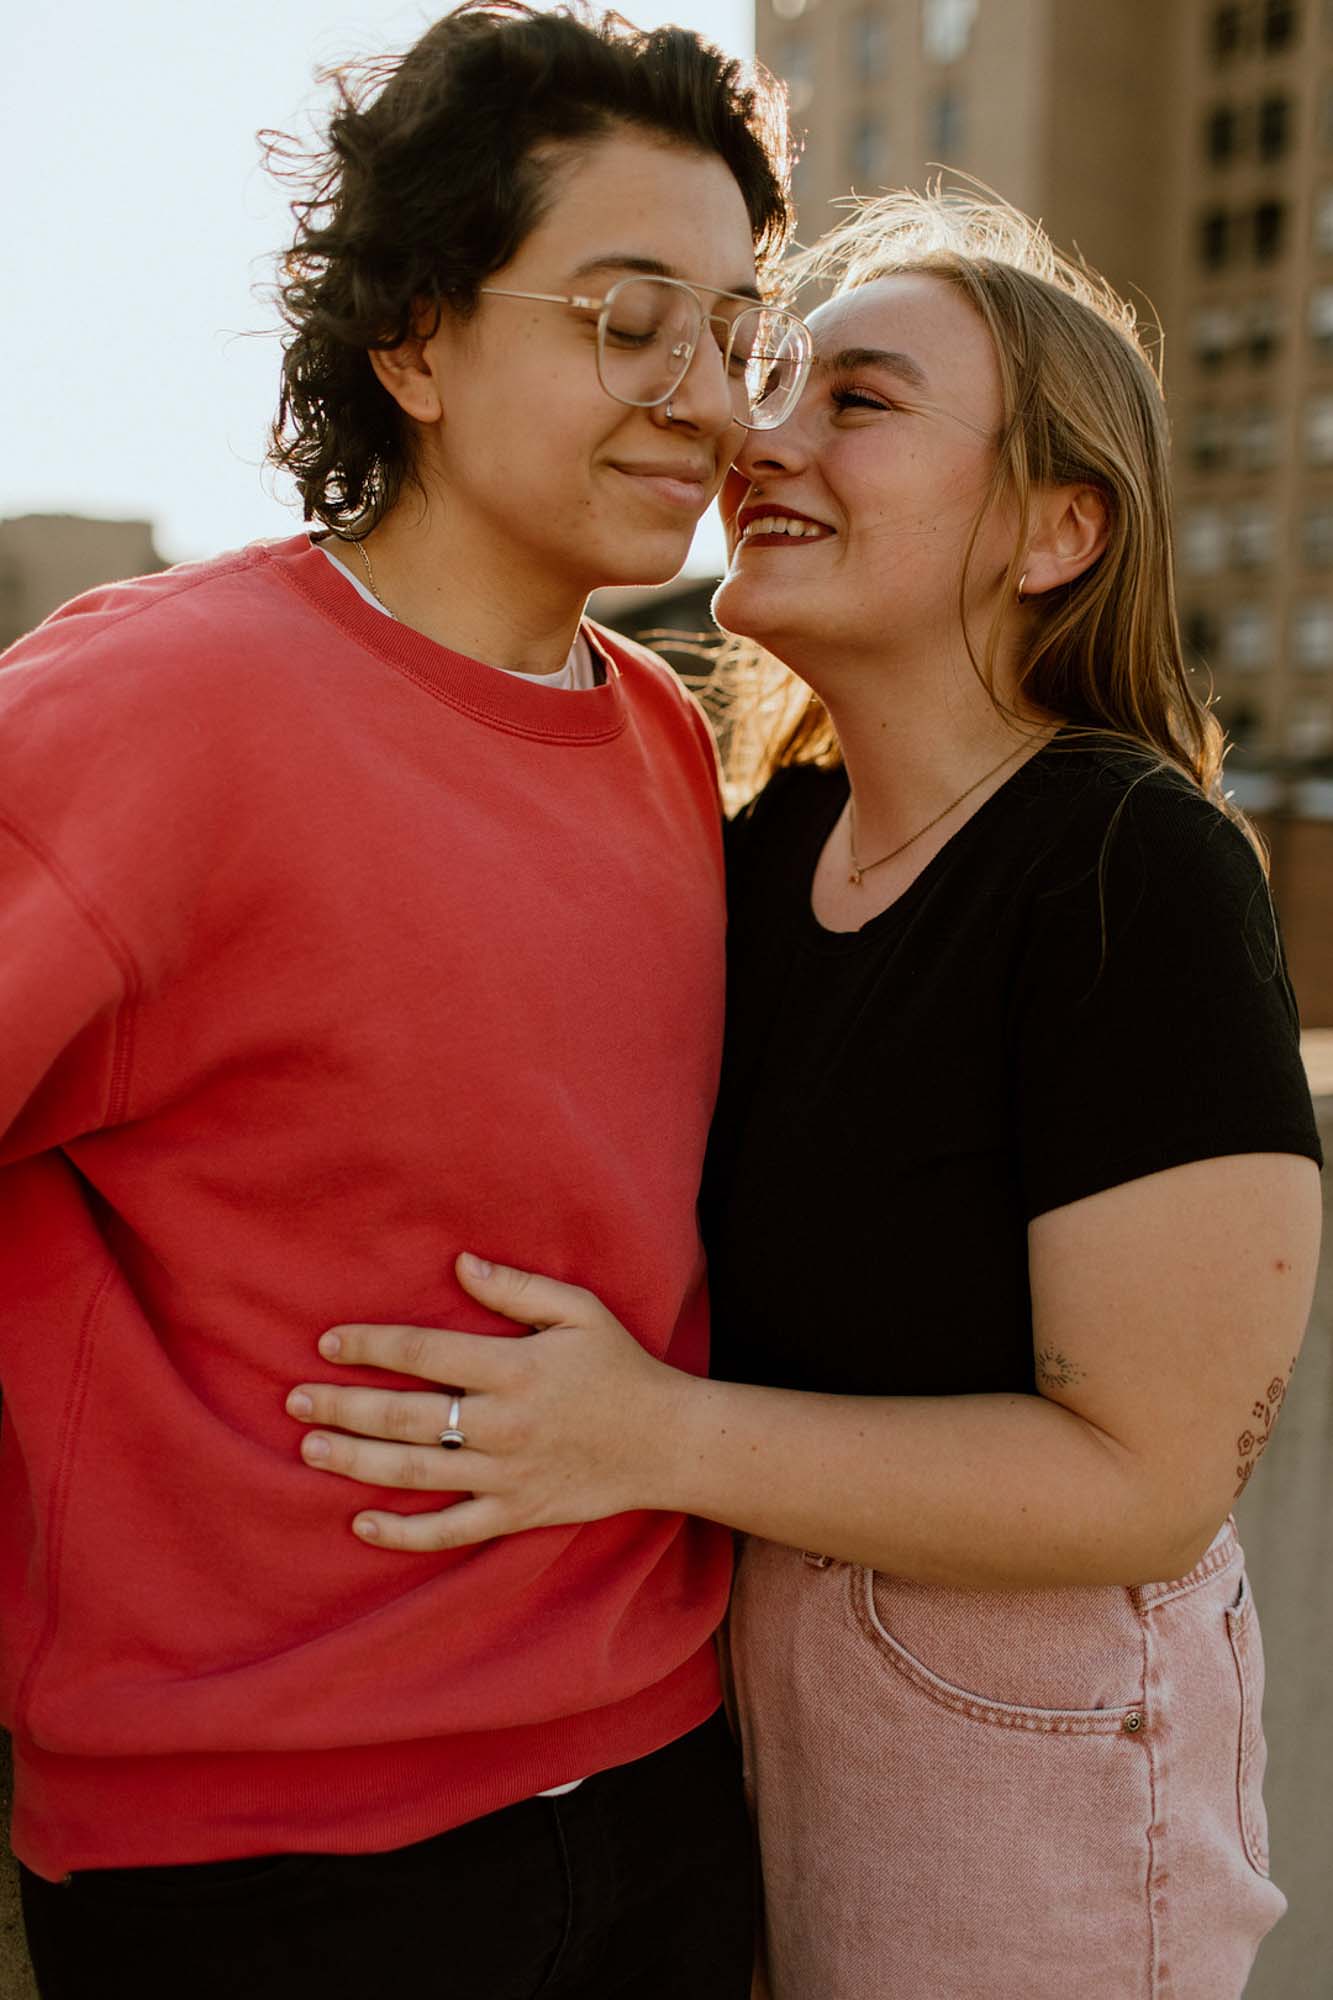 From an ice cream first date to a rooftop engagement session | Michaela Kessler Photography | Featured on Equally Wed, the leading LGBTQ+ wedding magazine